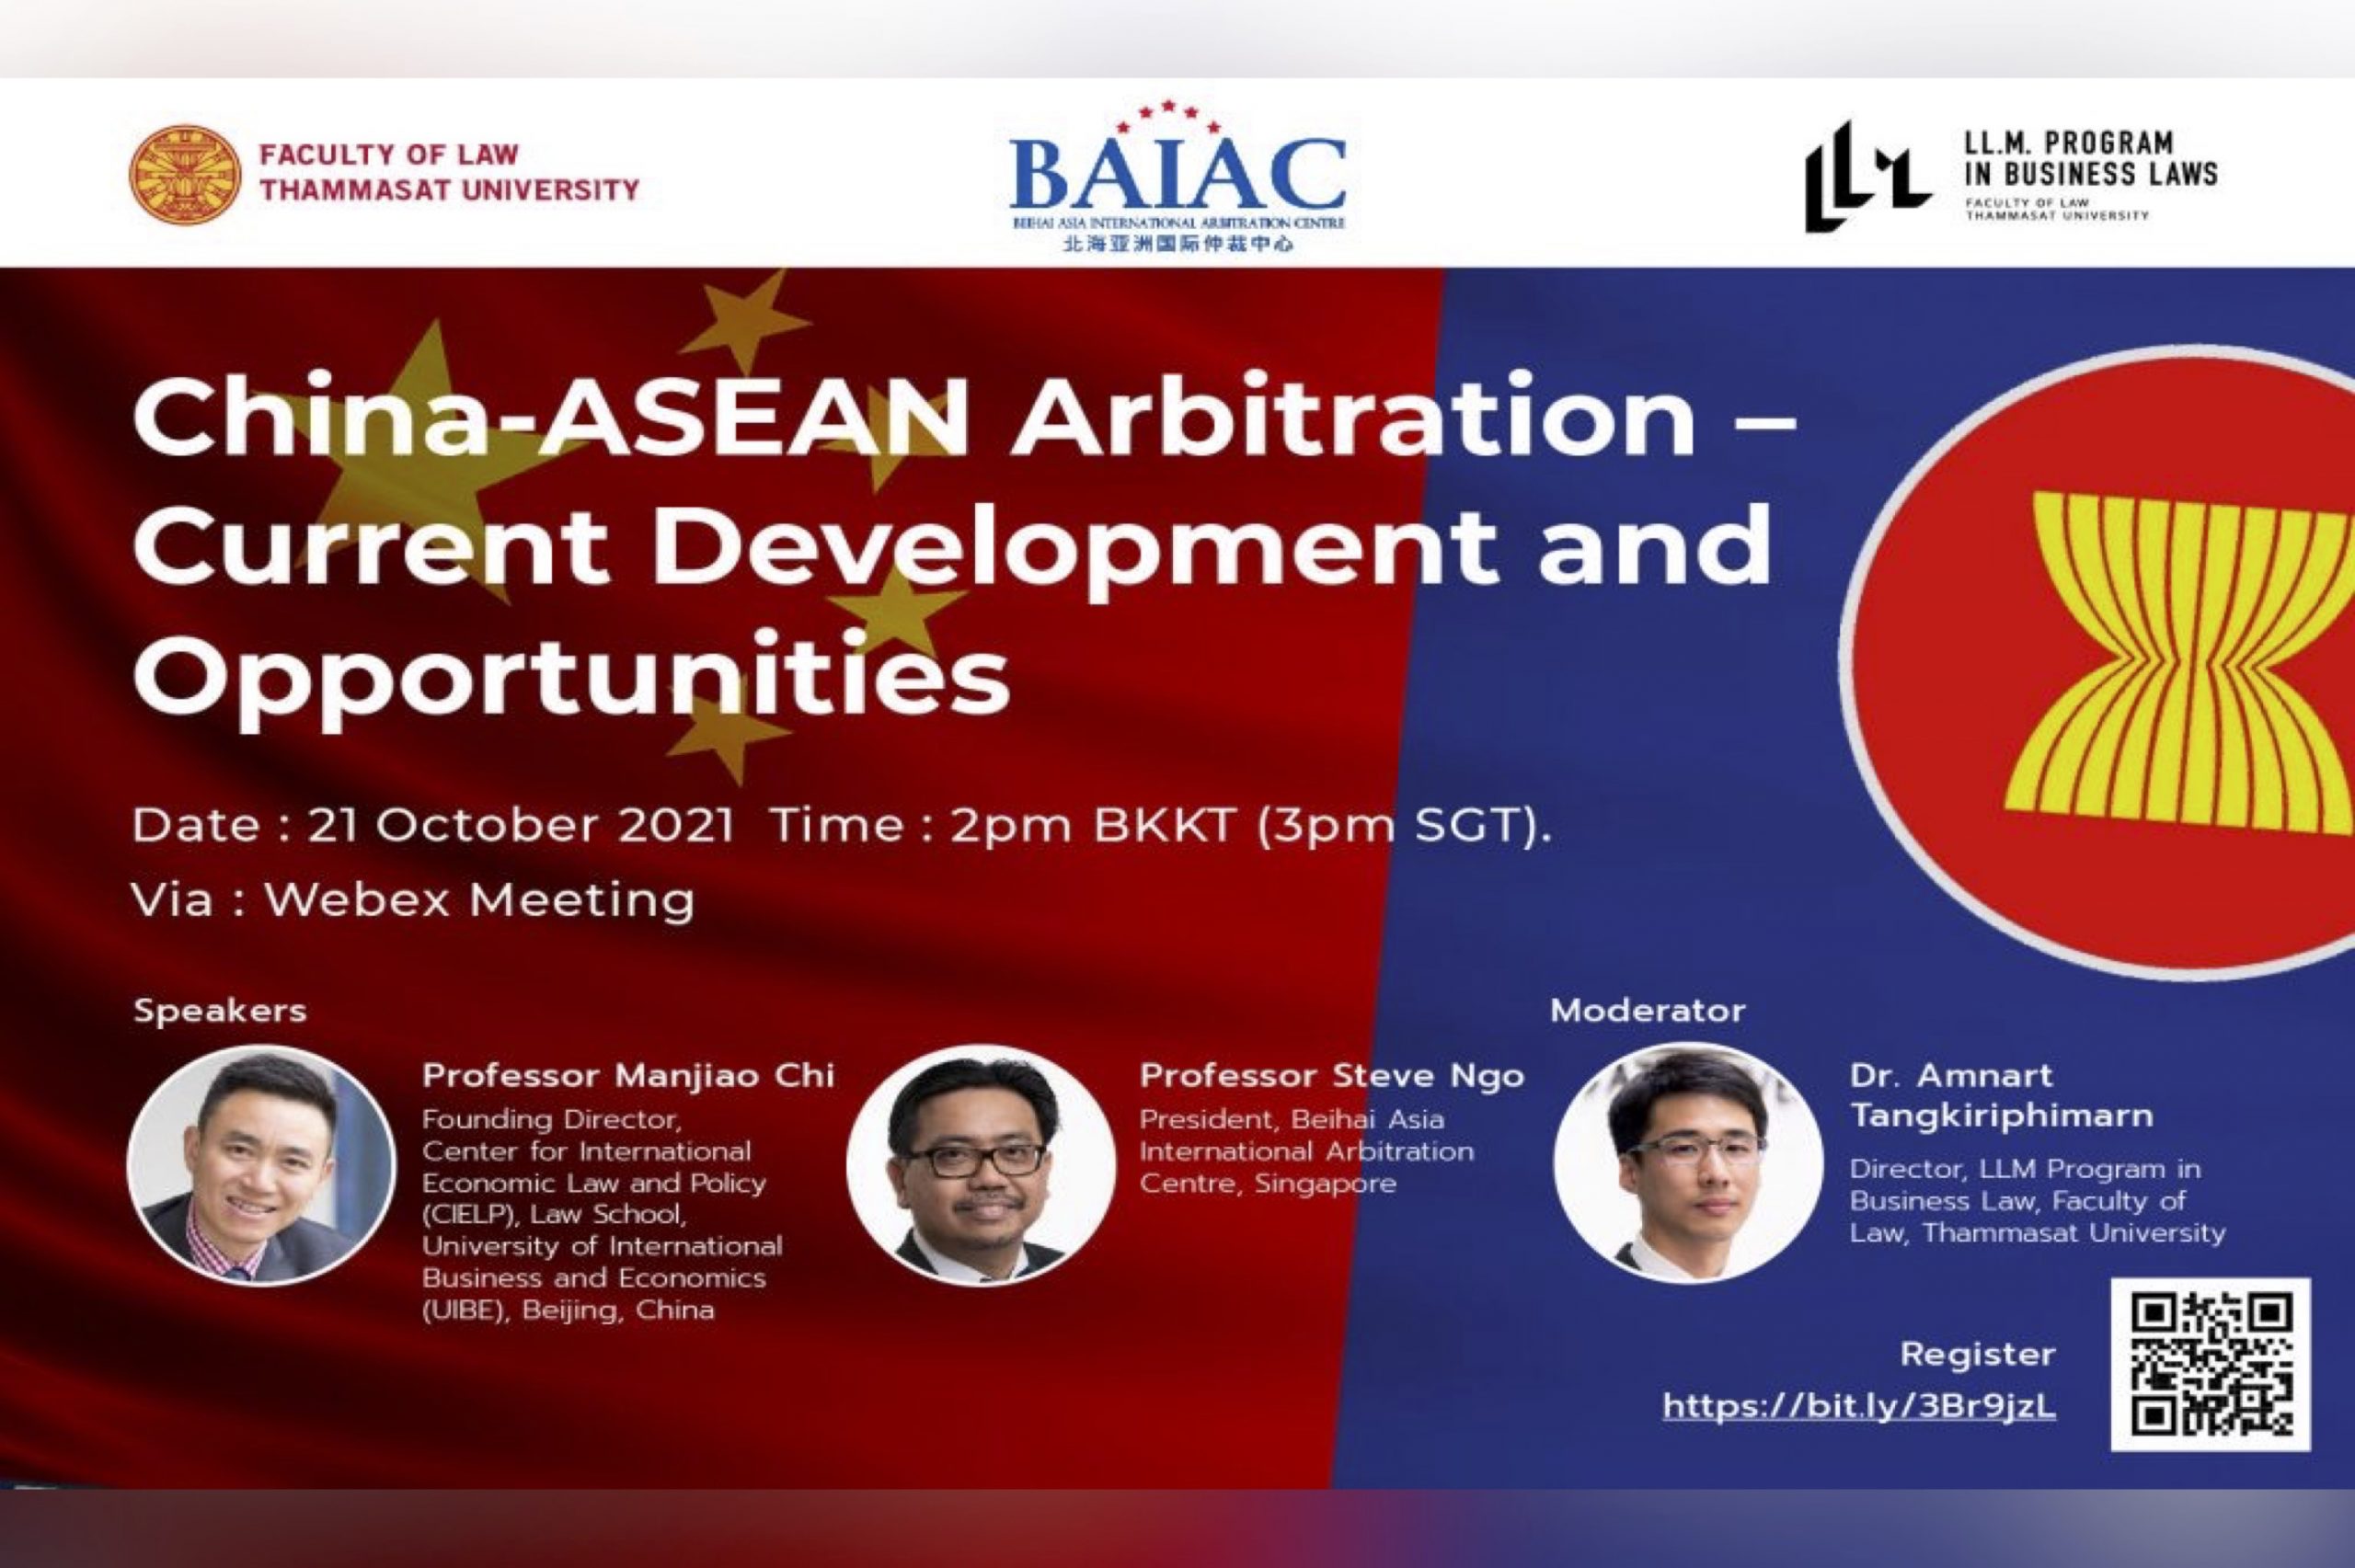 You are invited to join our webinar on the topic “China-ASEAN Arbitration – Current Development and Opportunities”